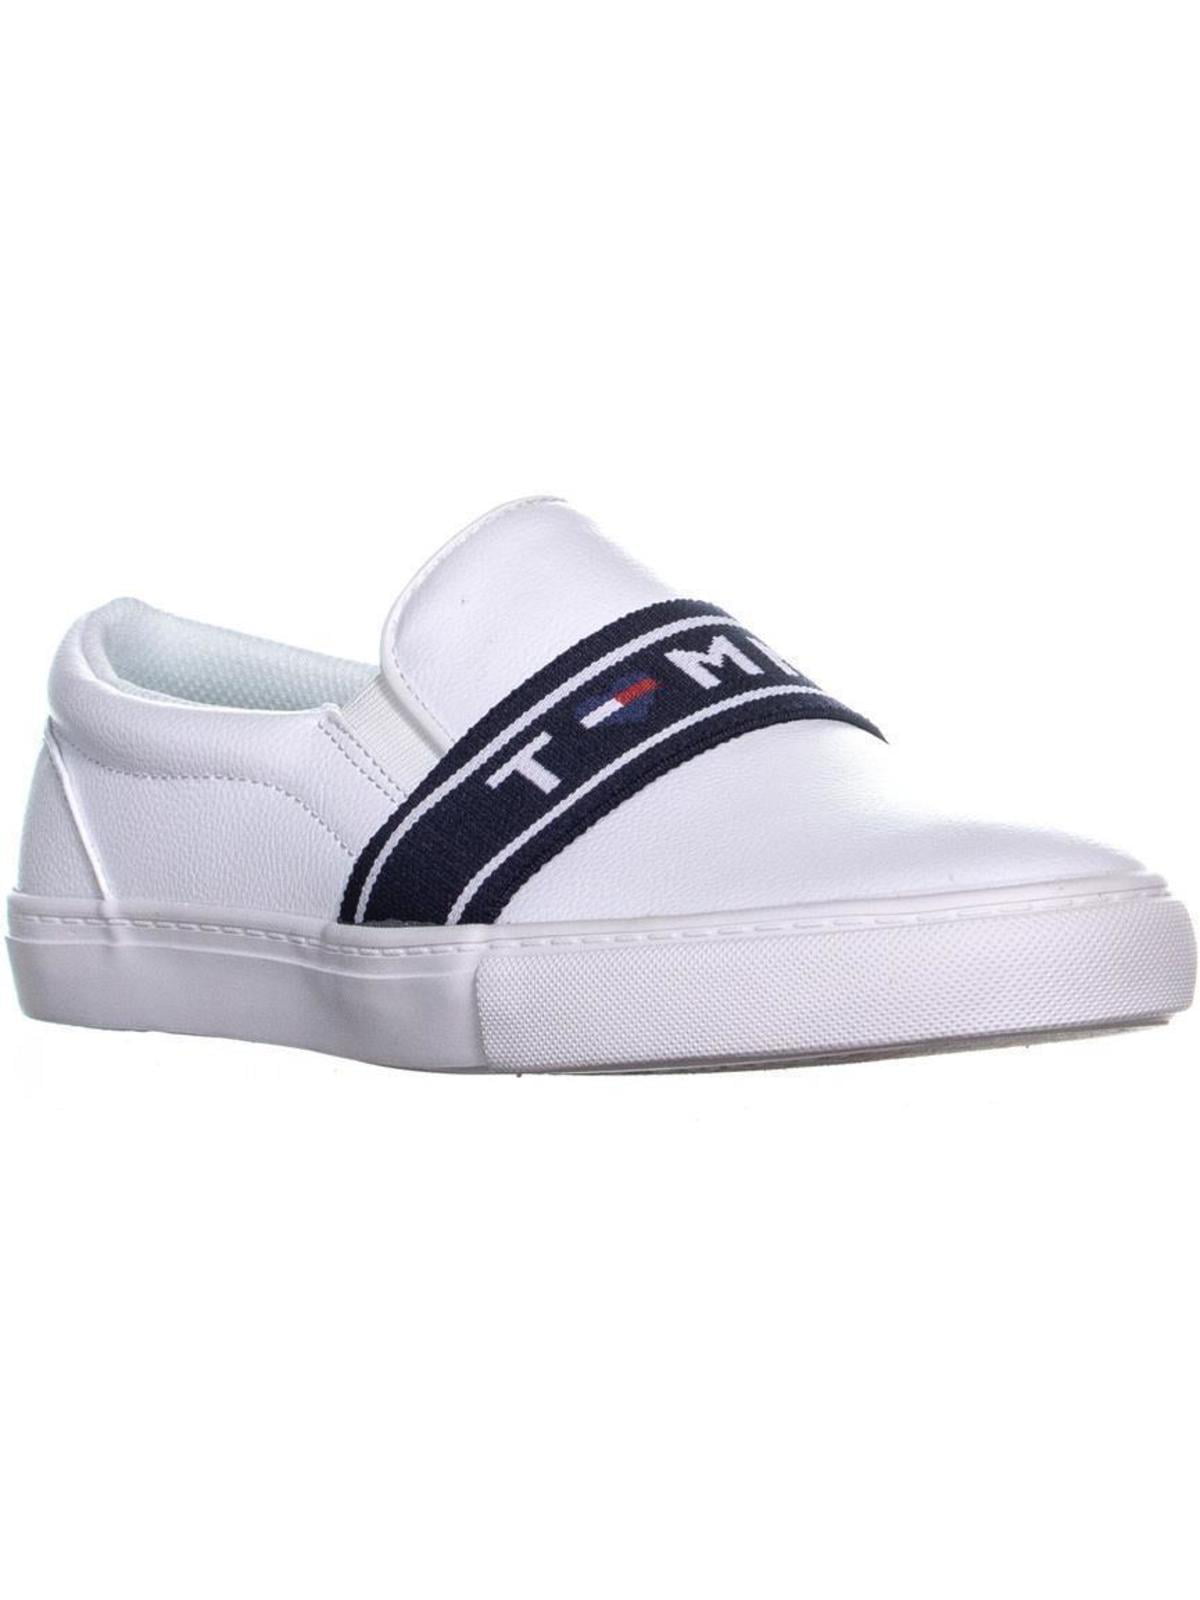 Tommy Hilfiger - Womens Tommy Hilfiger Lourena Slip On Sneakers, White ...